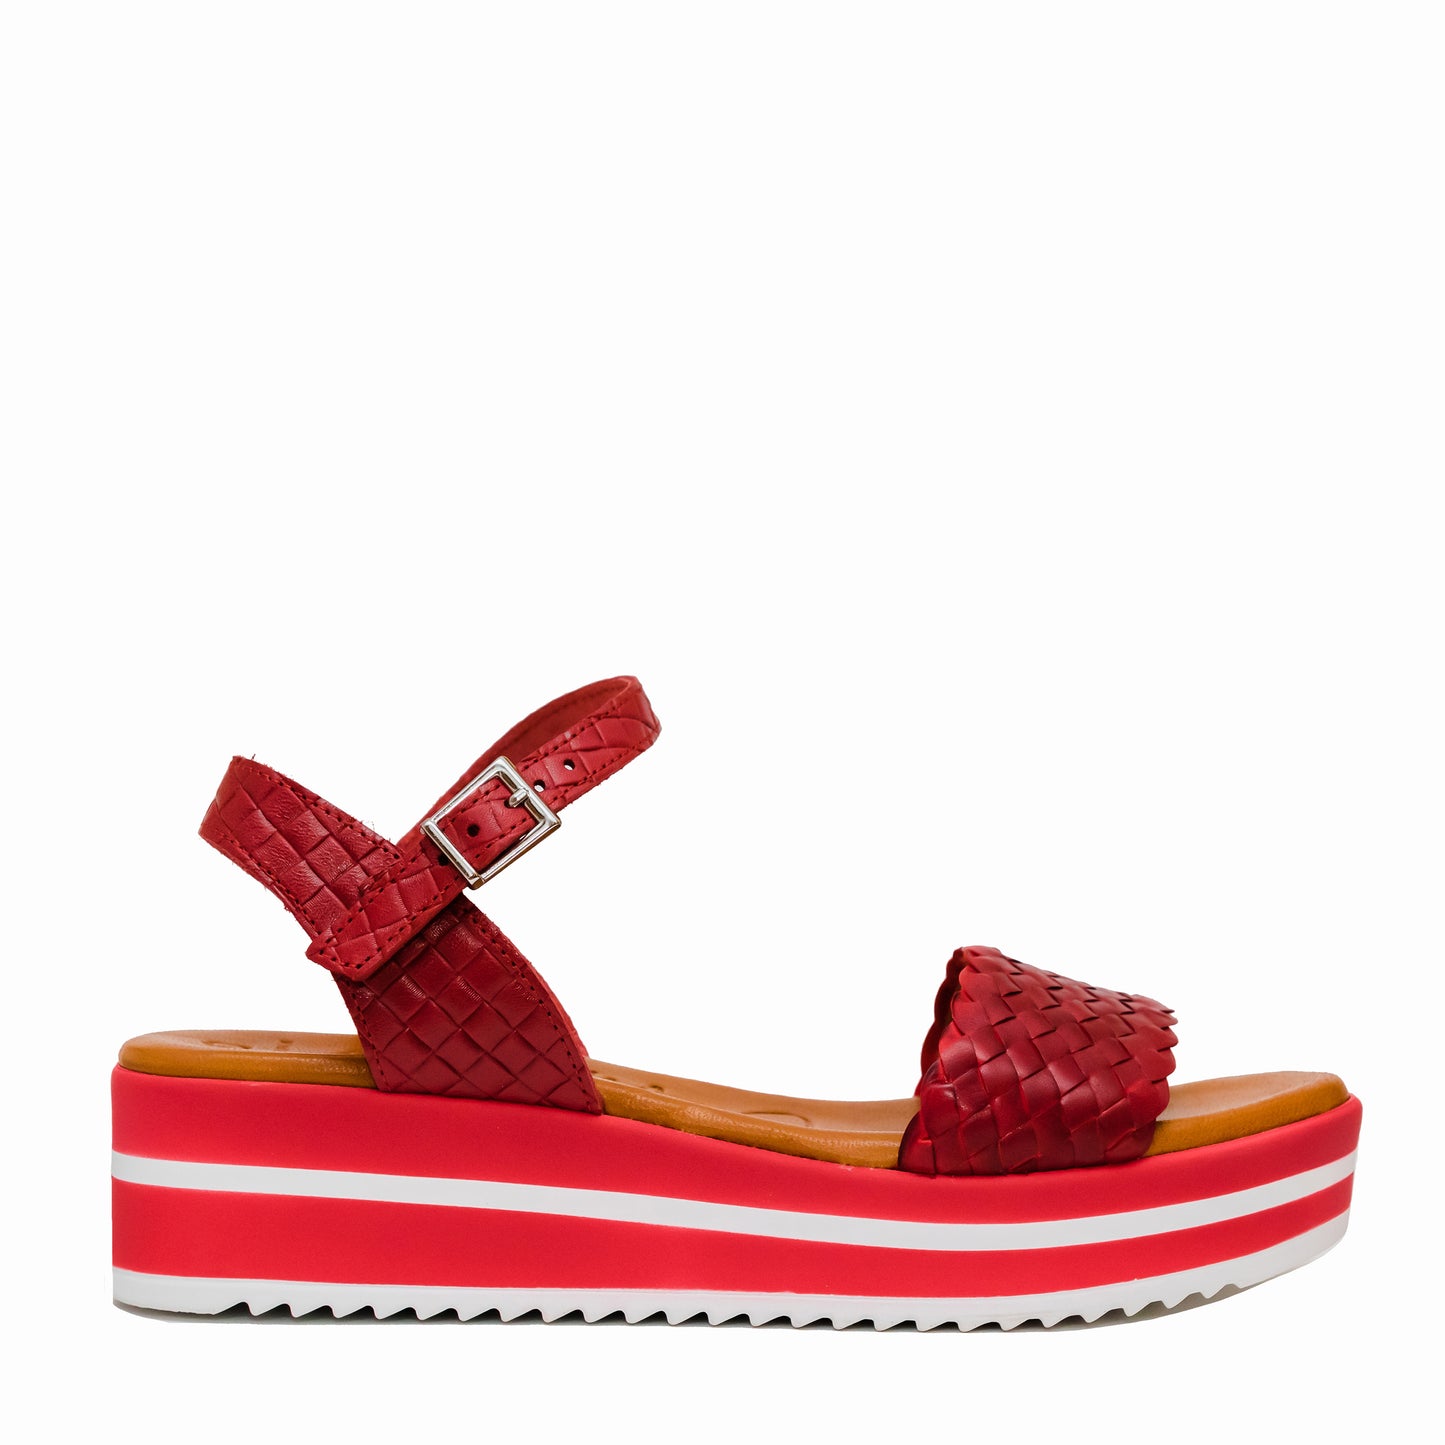 Oh My Sandals 5276TB Red Weave Sandals